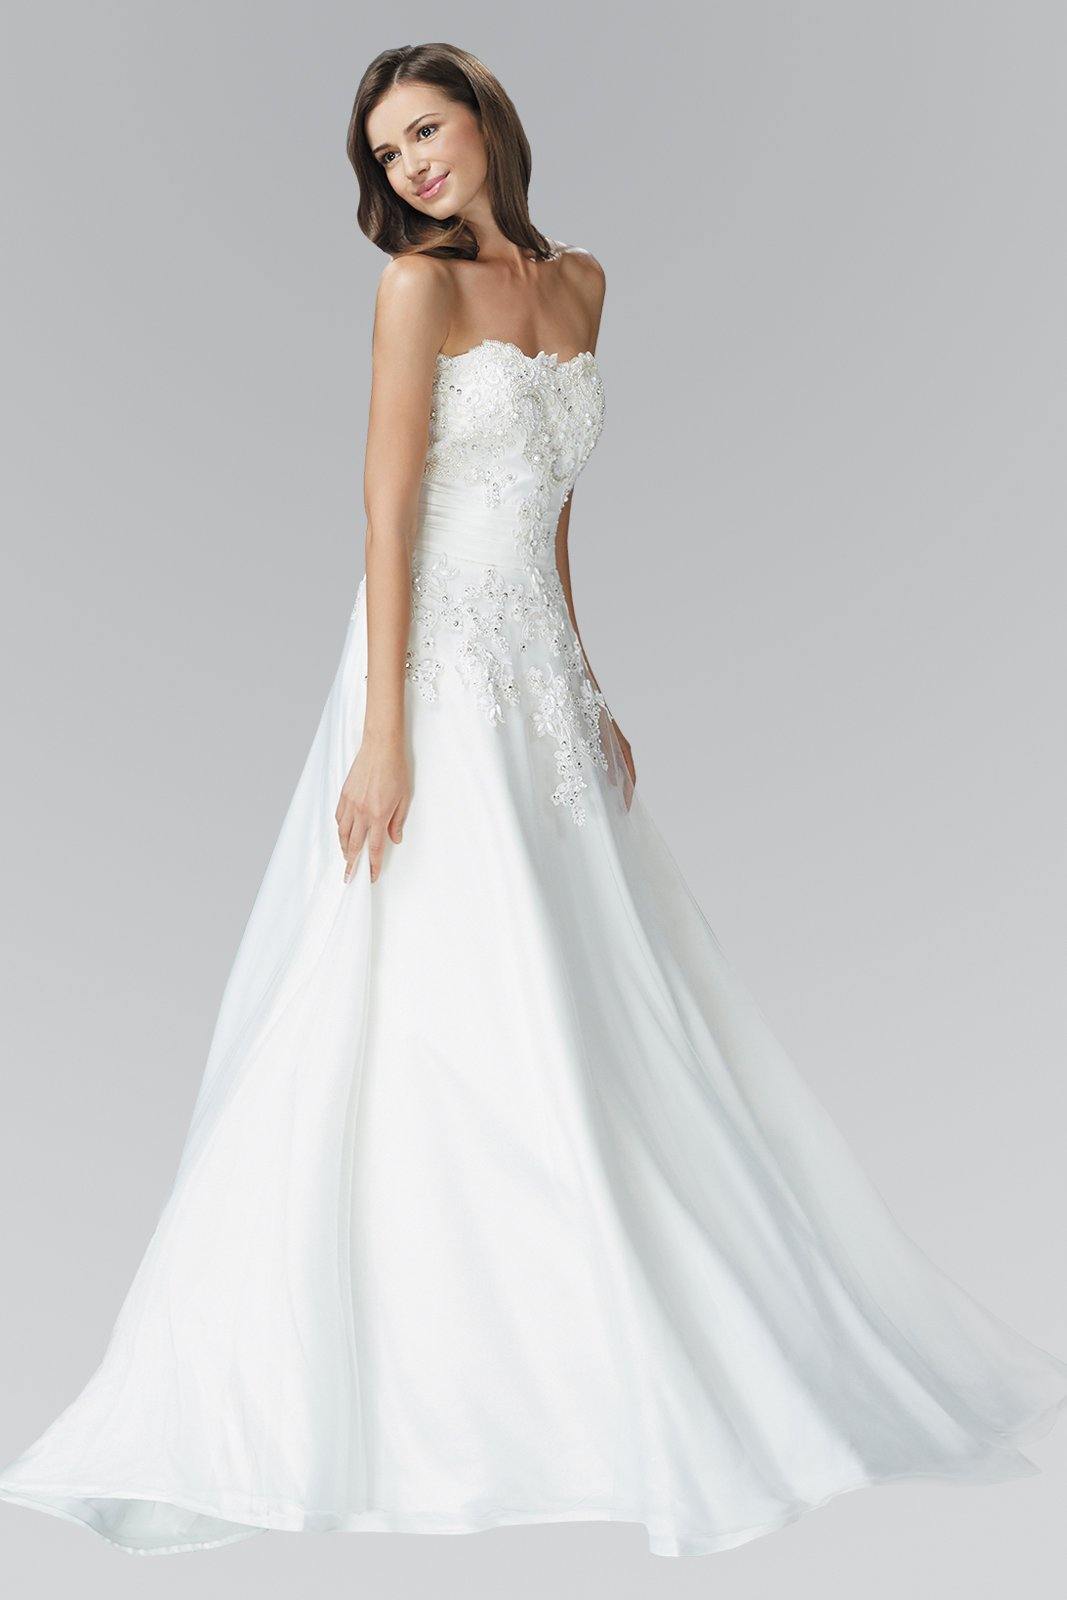 Modified A-Line Strapless Wedding Gown - The Dress Outlet Elizabeth K